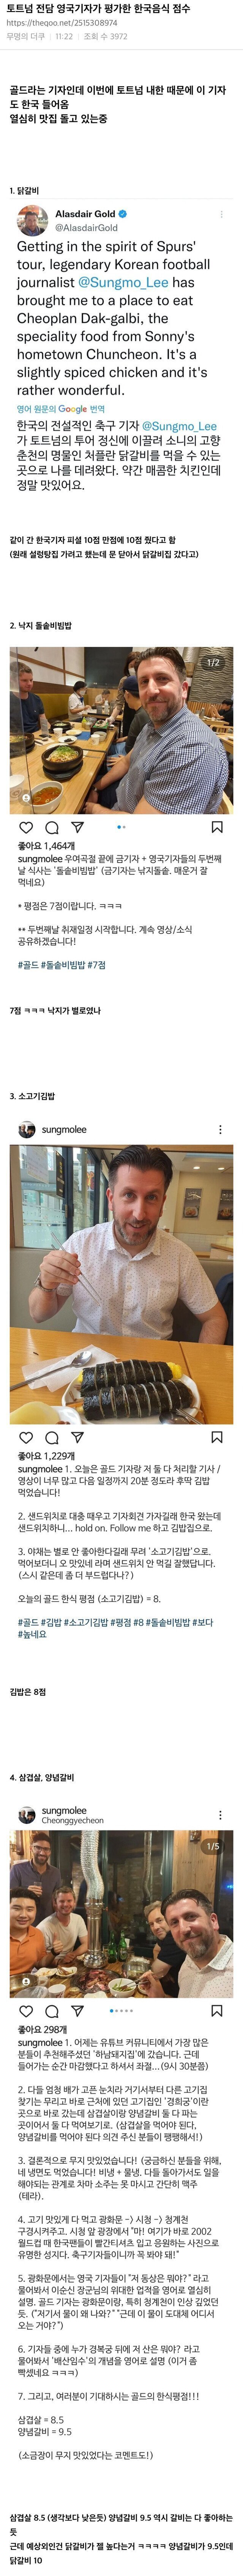 Korean Food Score Evaluated by a British Journalist Exclusive to Tottenham